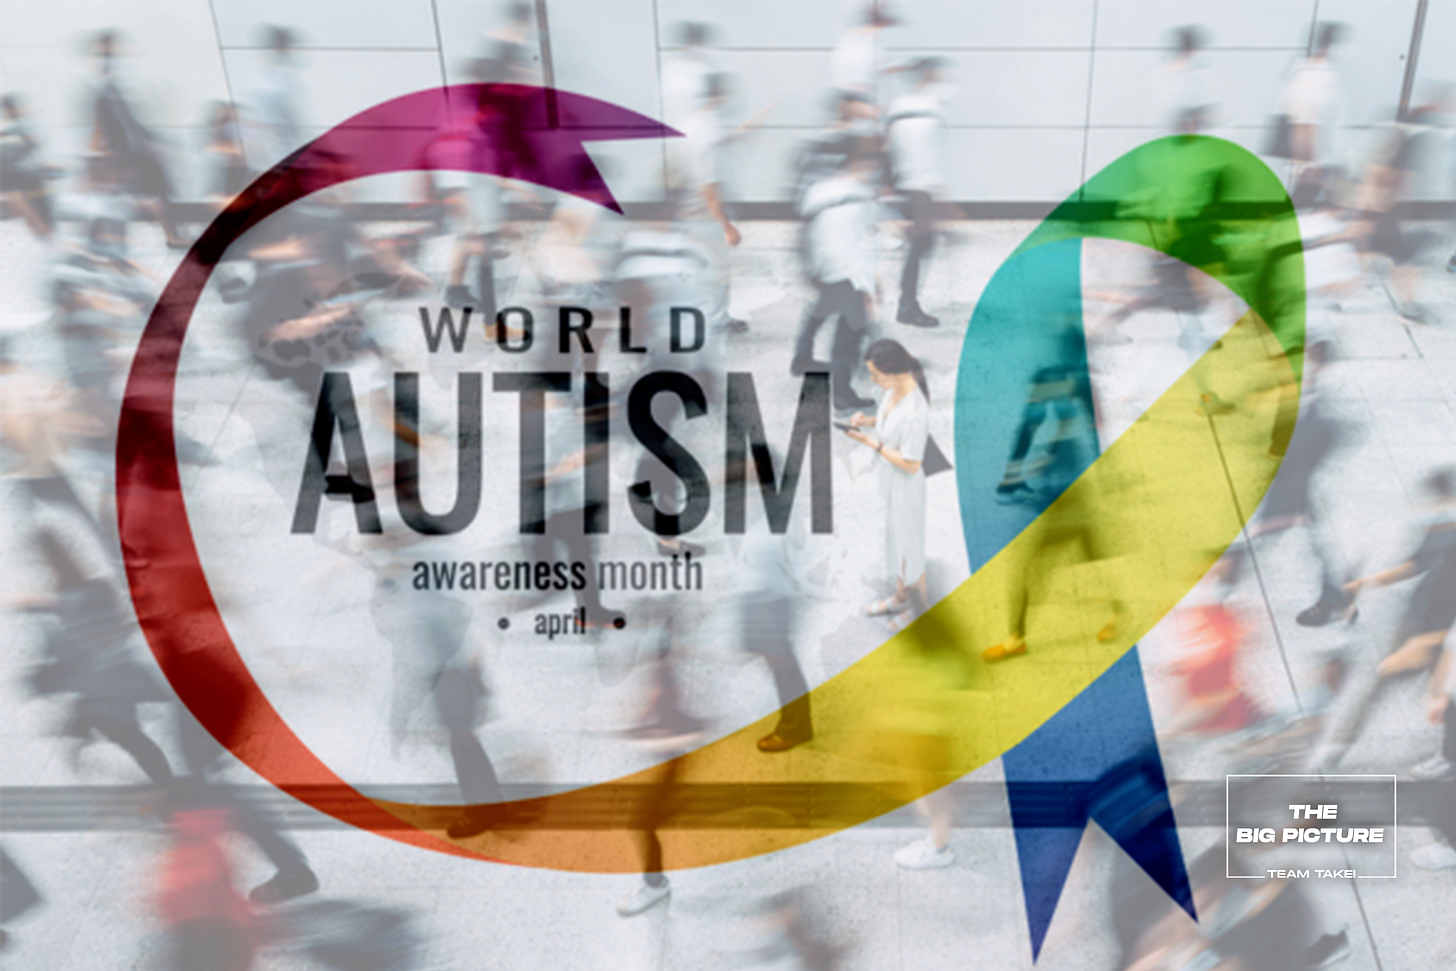 Crowd of people with World Autism Awareness month overlaid